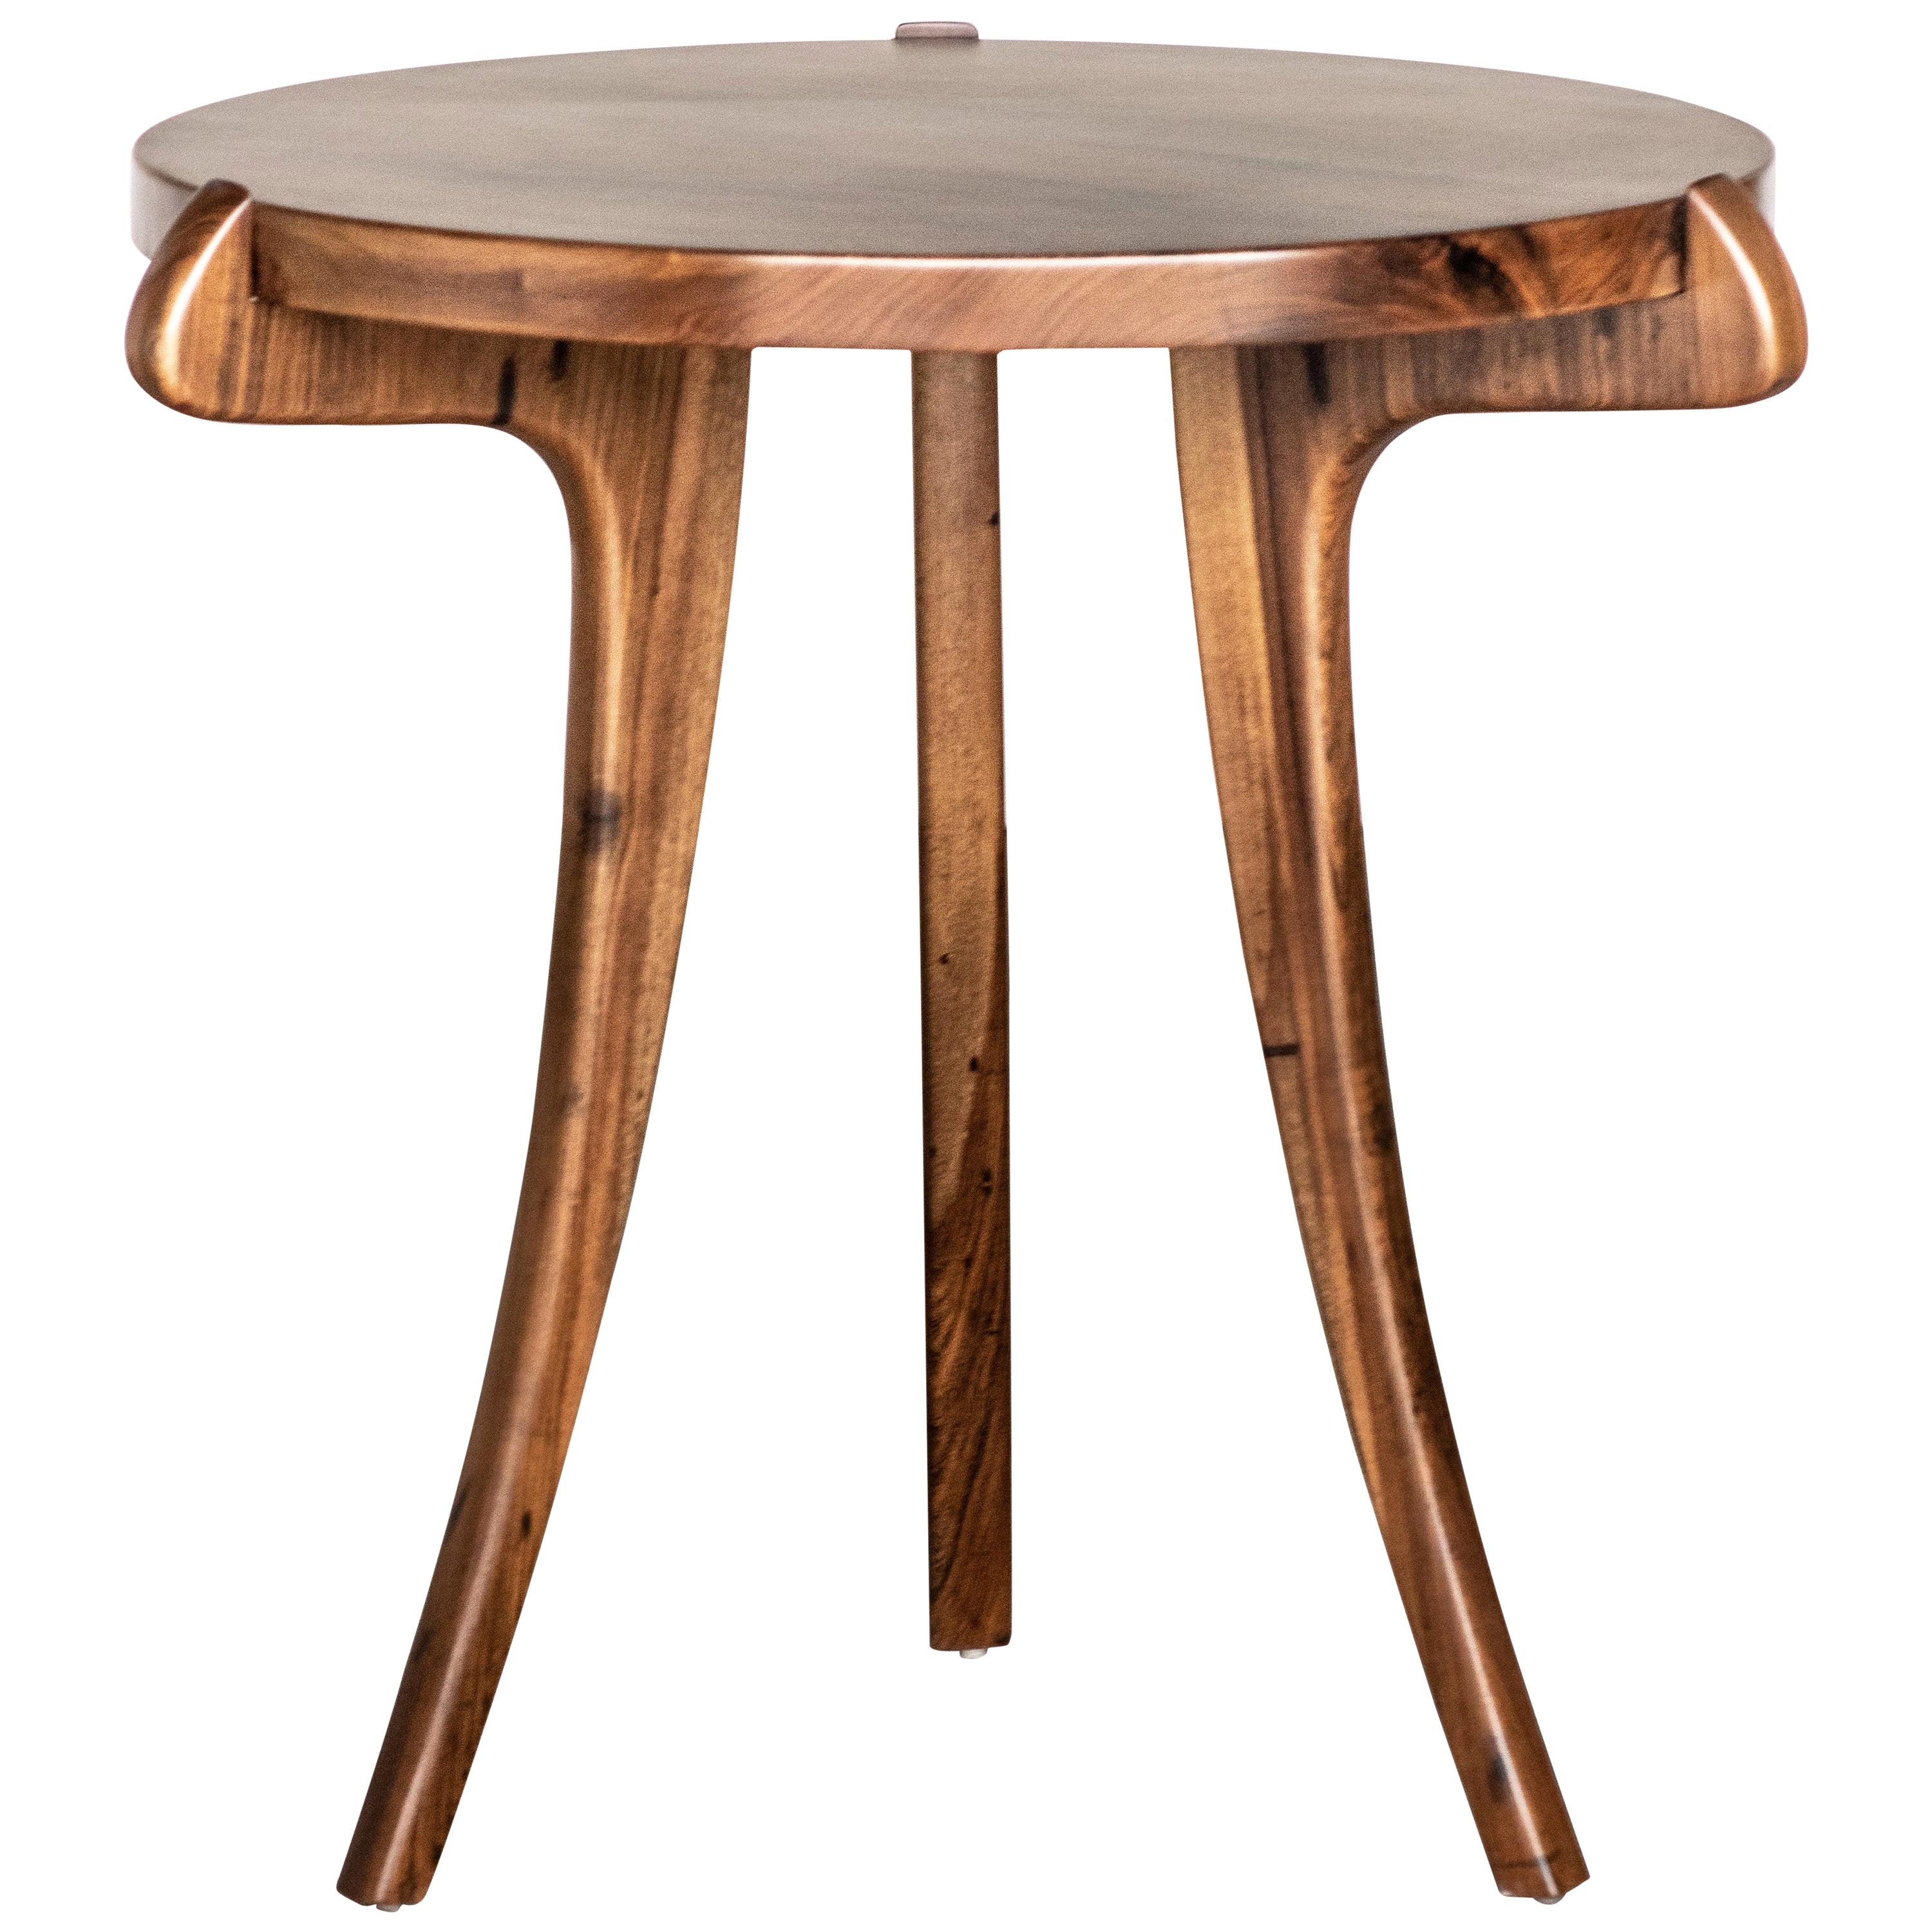 Contemporary Uccello Wood Sabre-Leg Side Table from Costantini